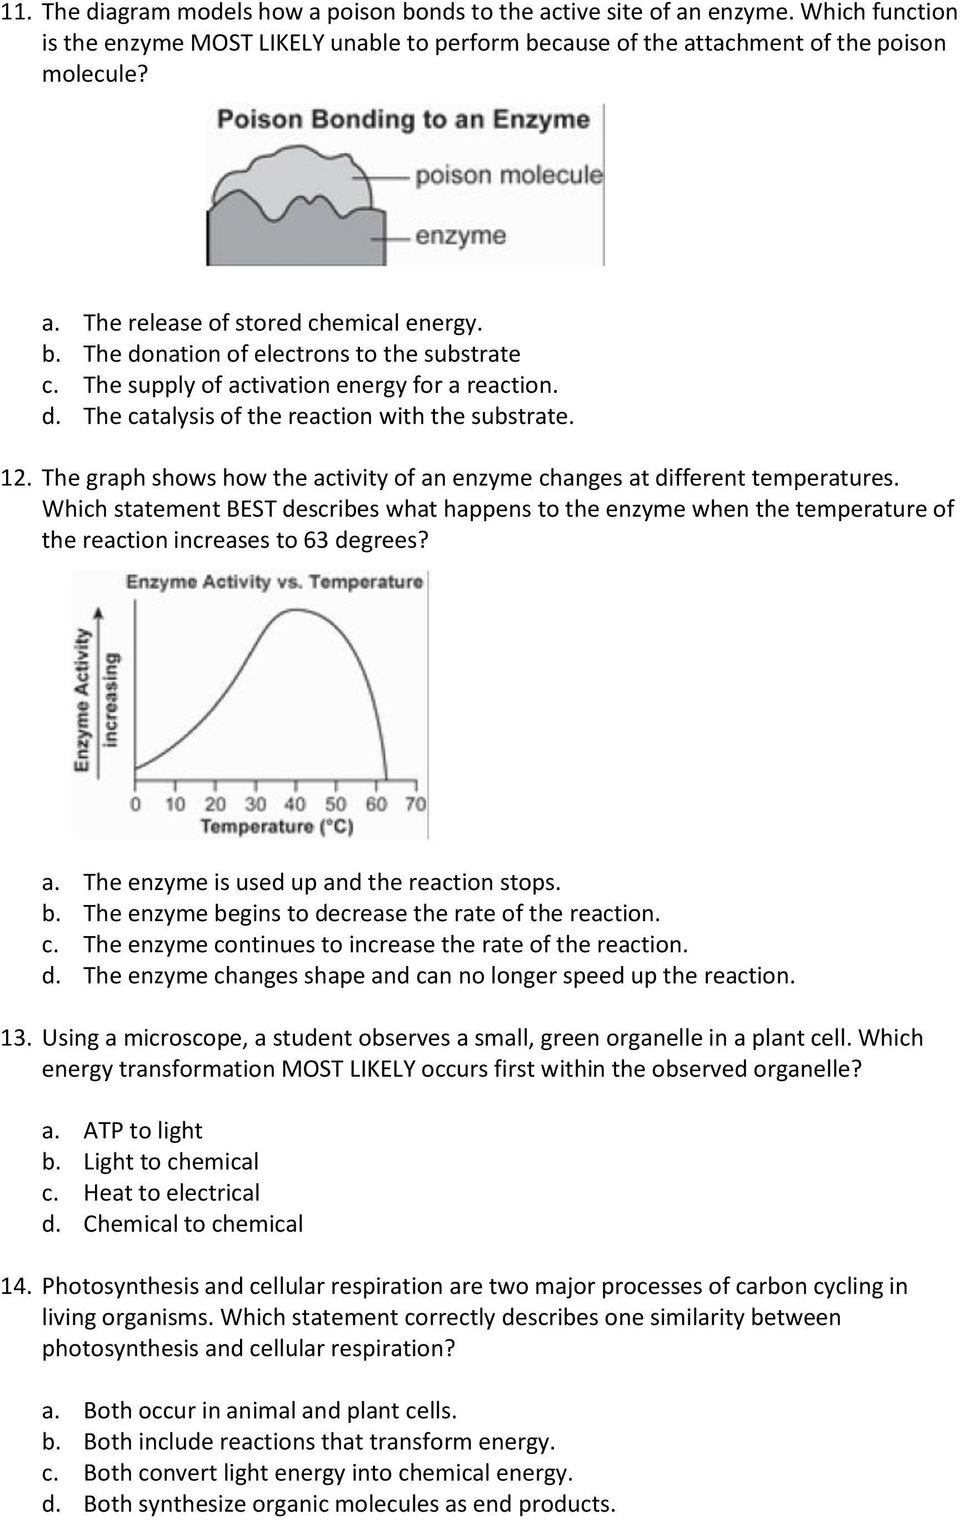 The graph shows how the activity of an enzyme changes at different temperatures. Which statement BEST describes what happens to the enzyme when the temperature of the reaction increases to 63 degrees?